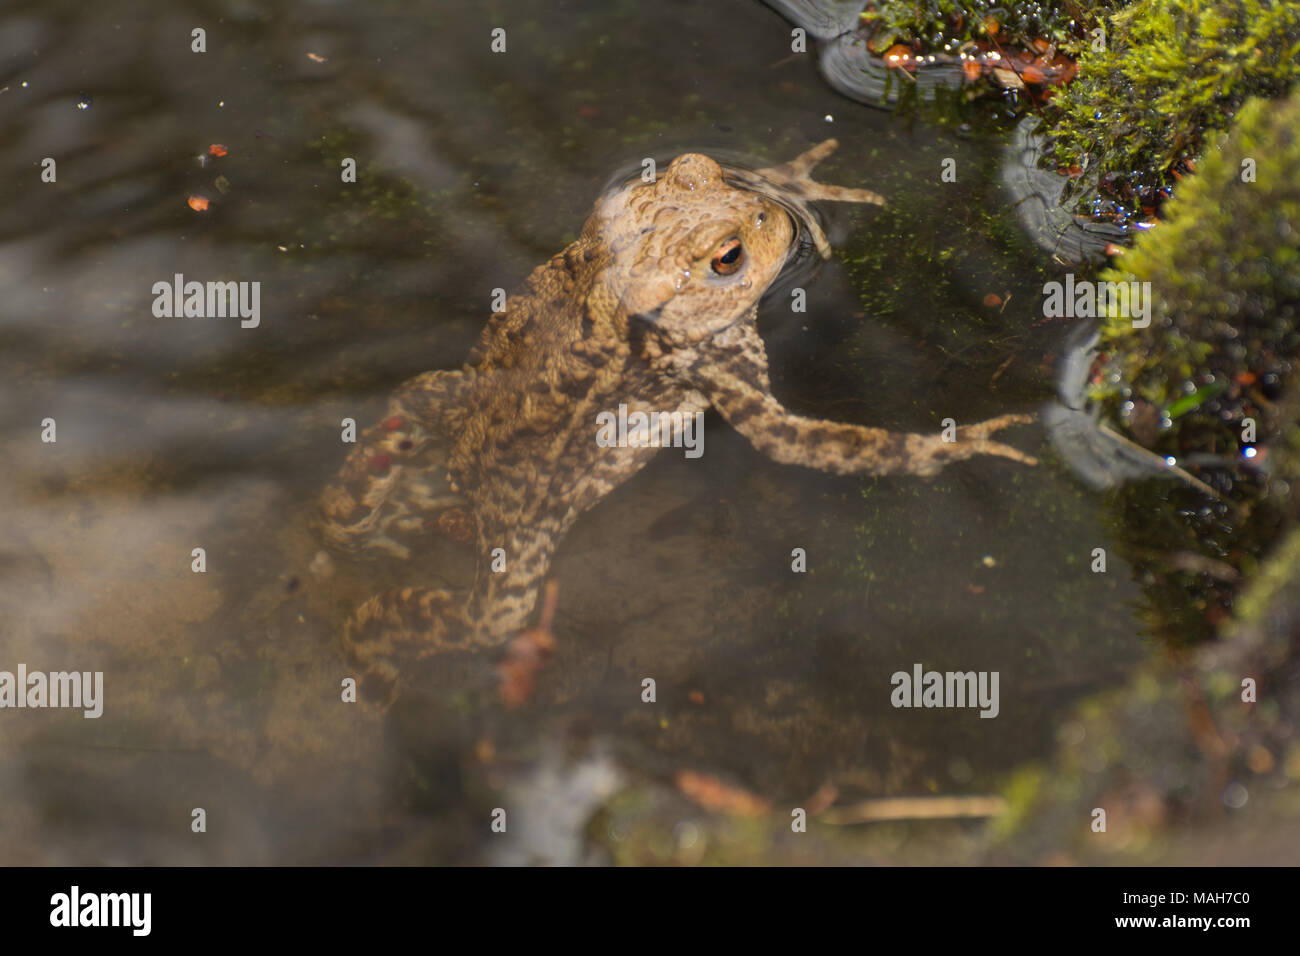 Common toad (Bufo bufo) in a breeding pond during spring in Surrey, UK Stock Photo